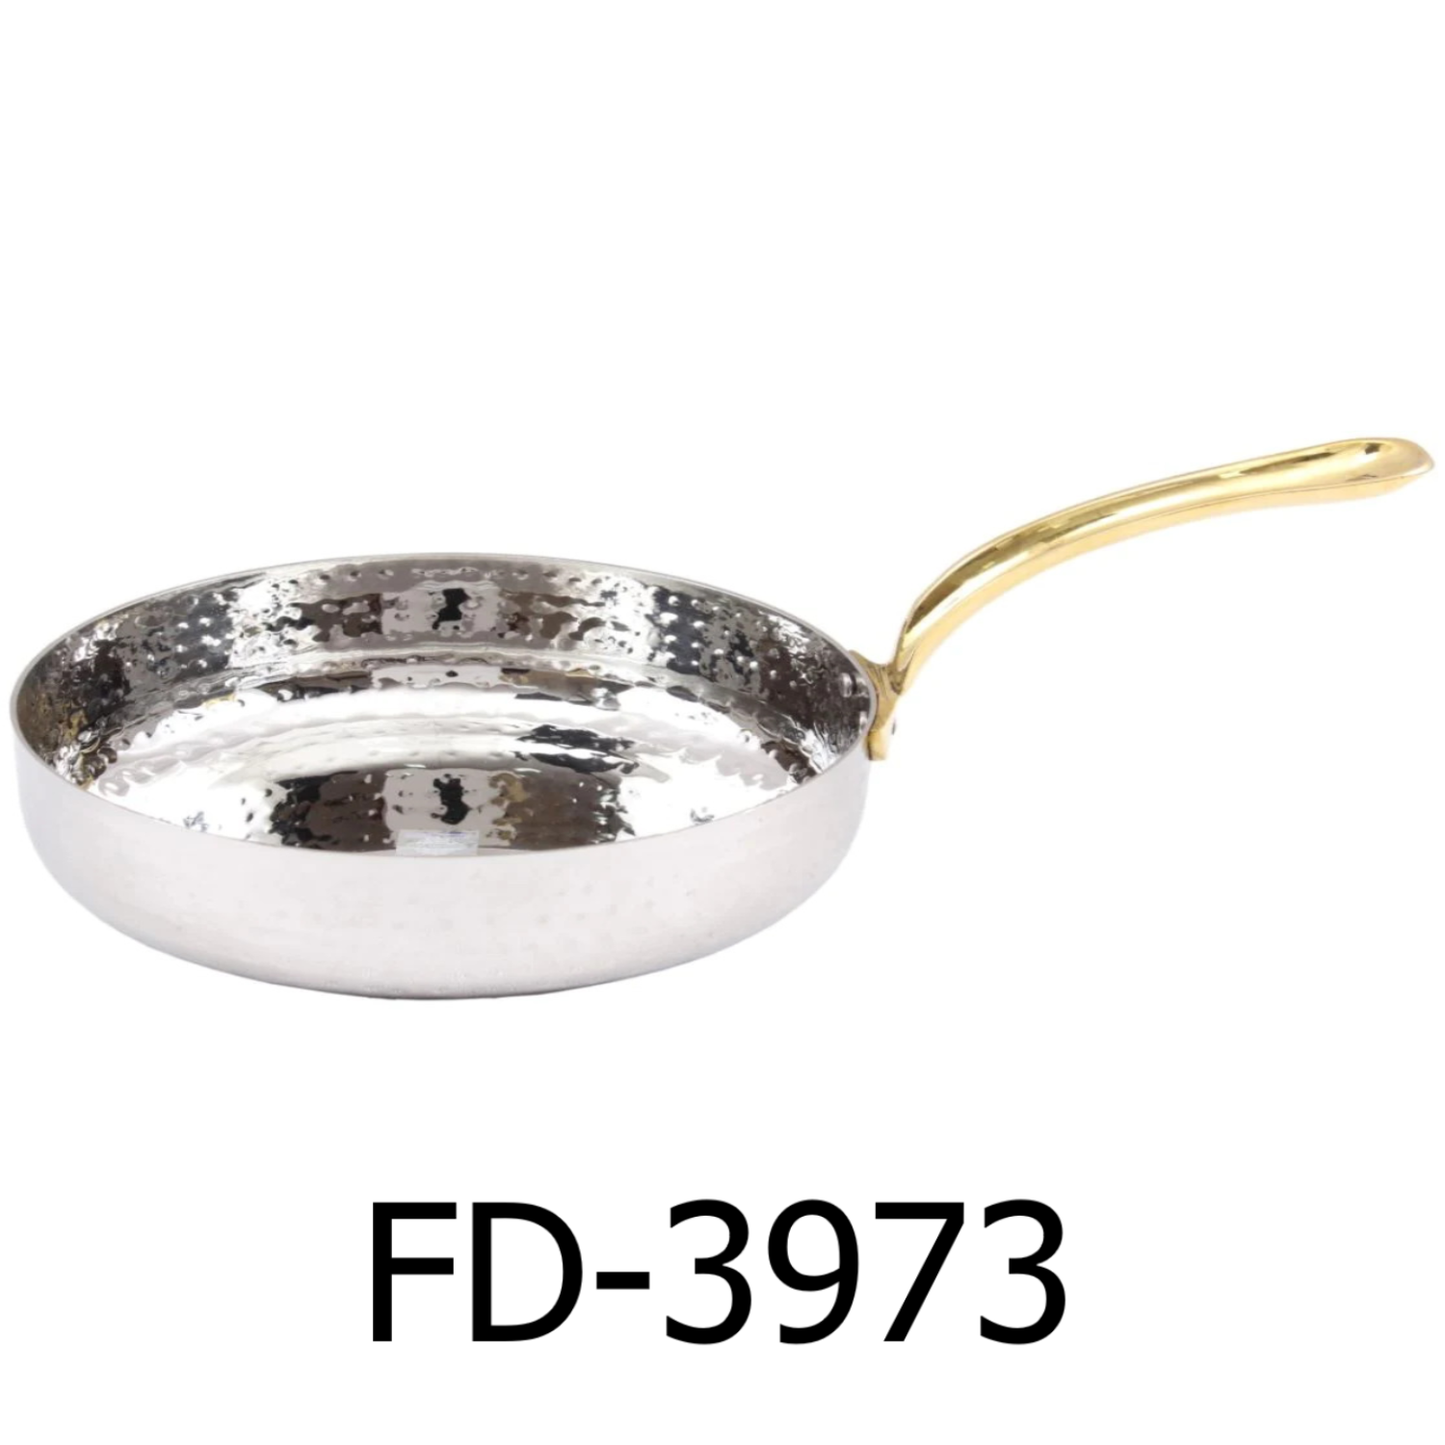 6.5" Stainless Steel Hammered Mini Fry Pan with Brass Handle